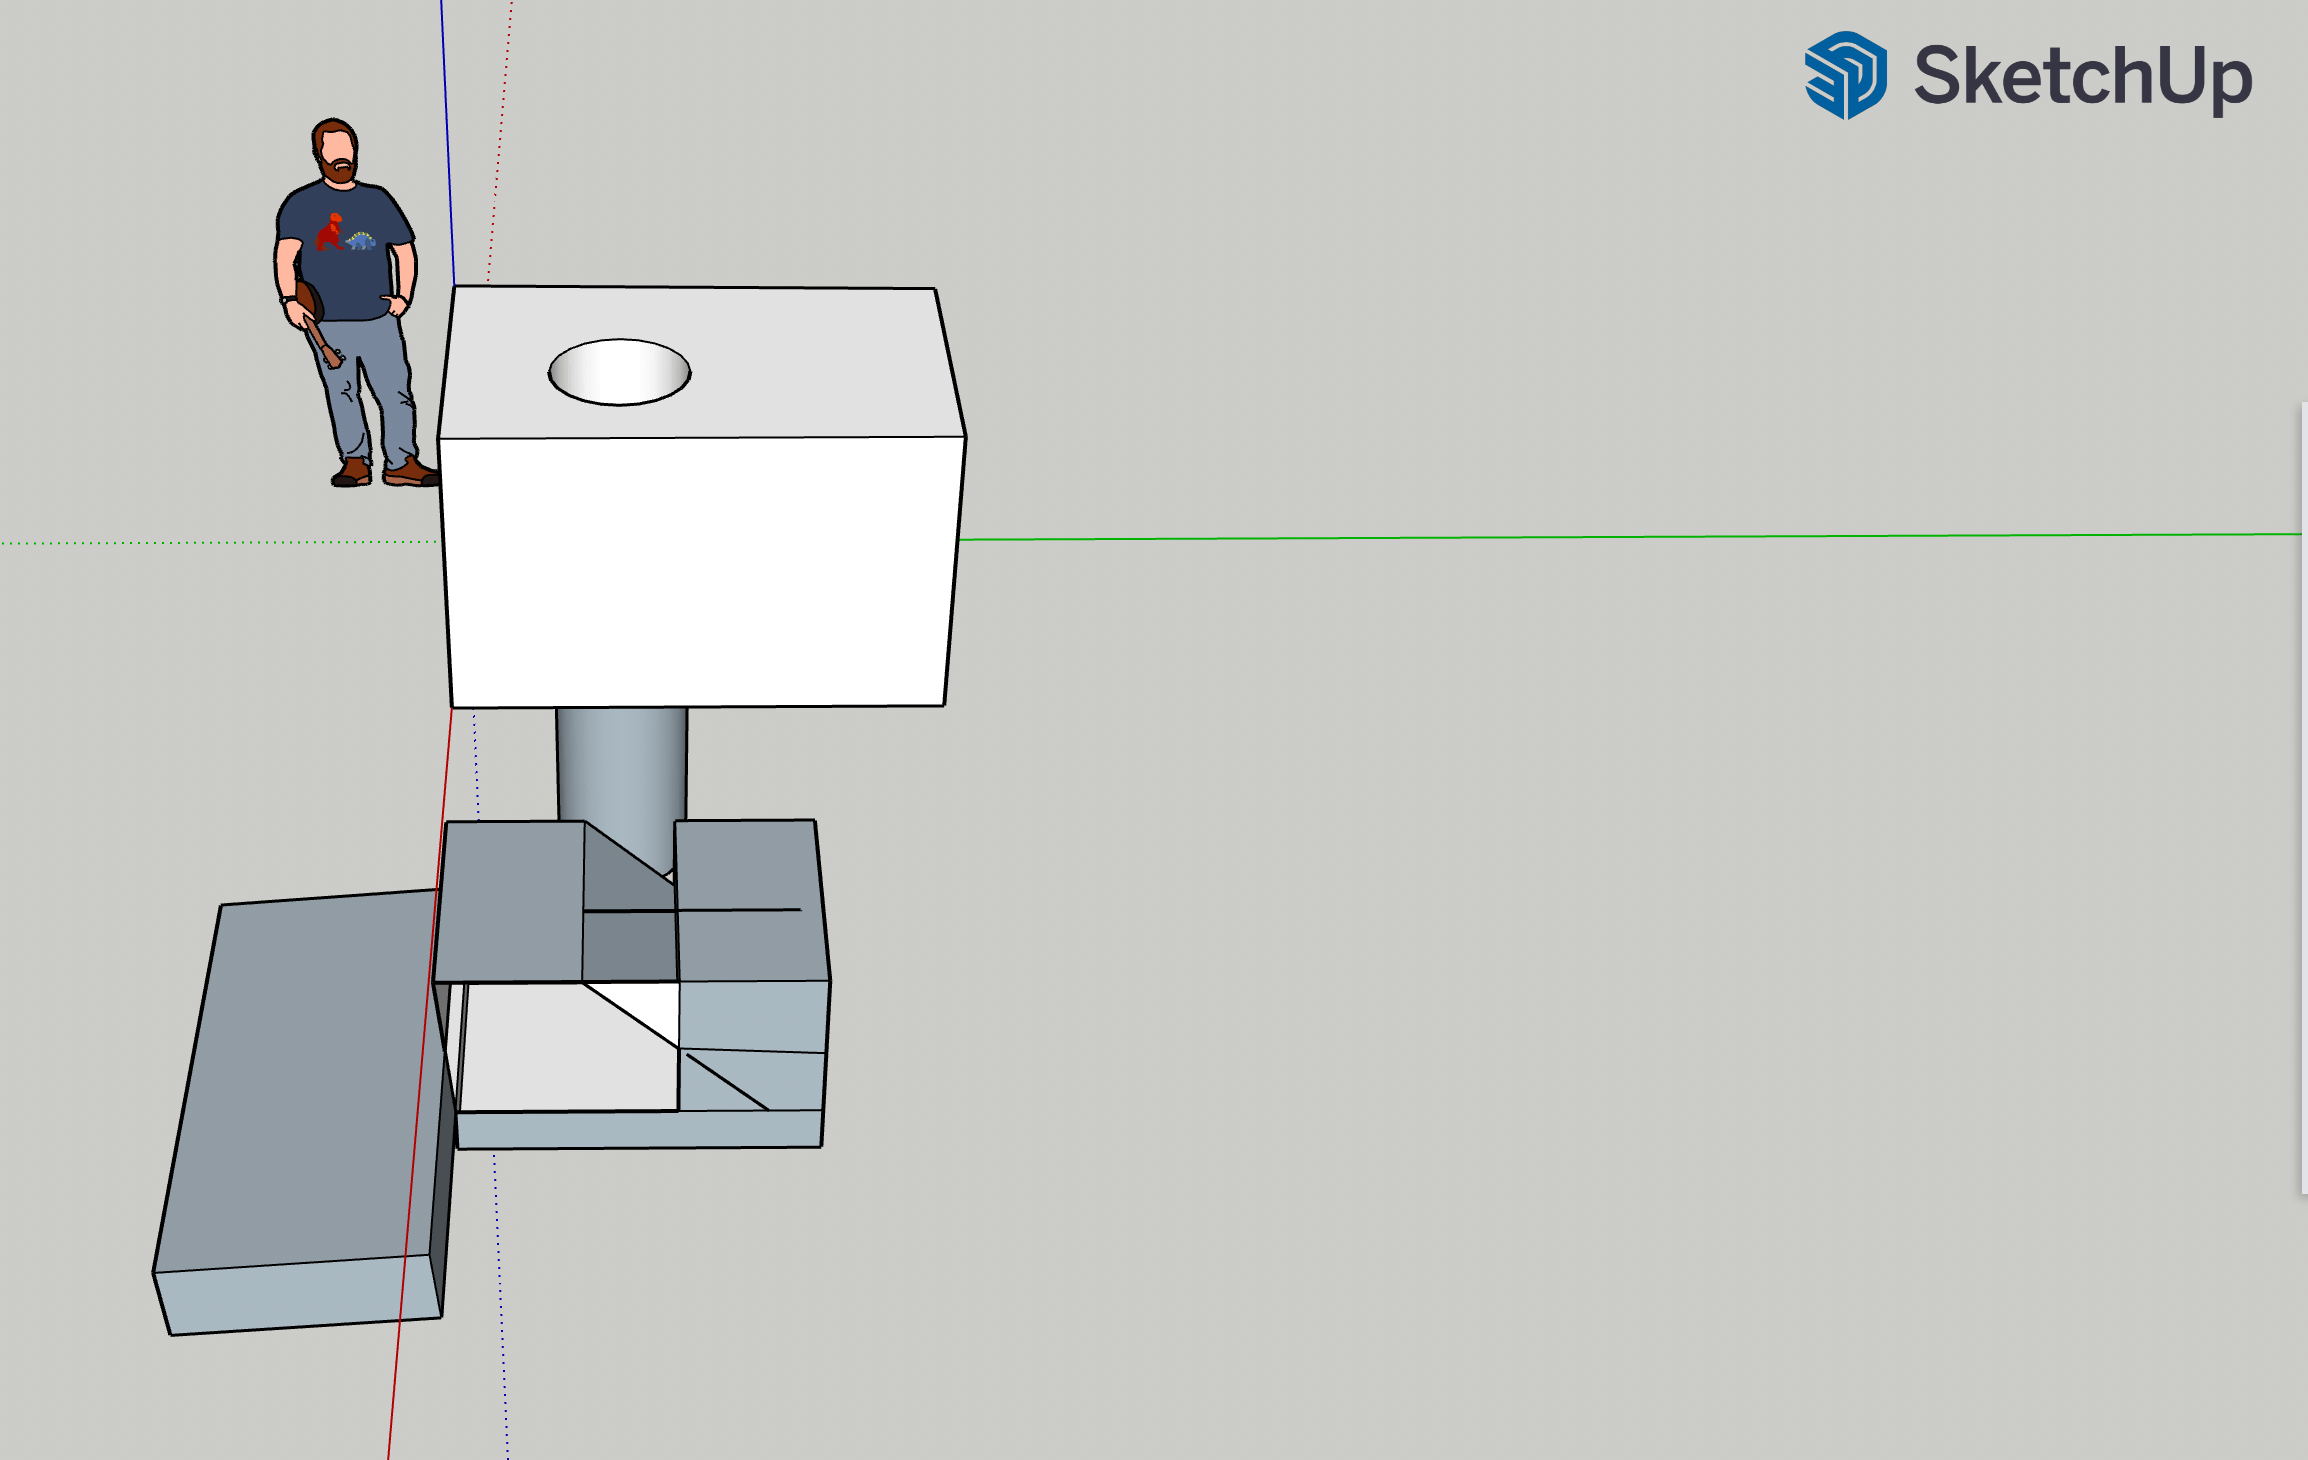 screenshot of sketchup 3D doodles with person